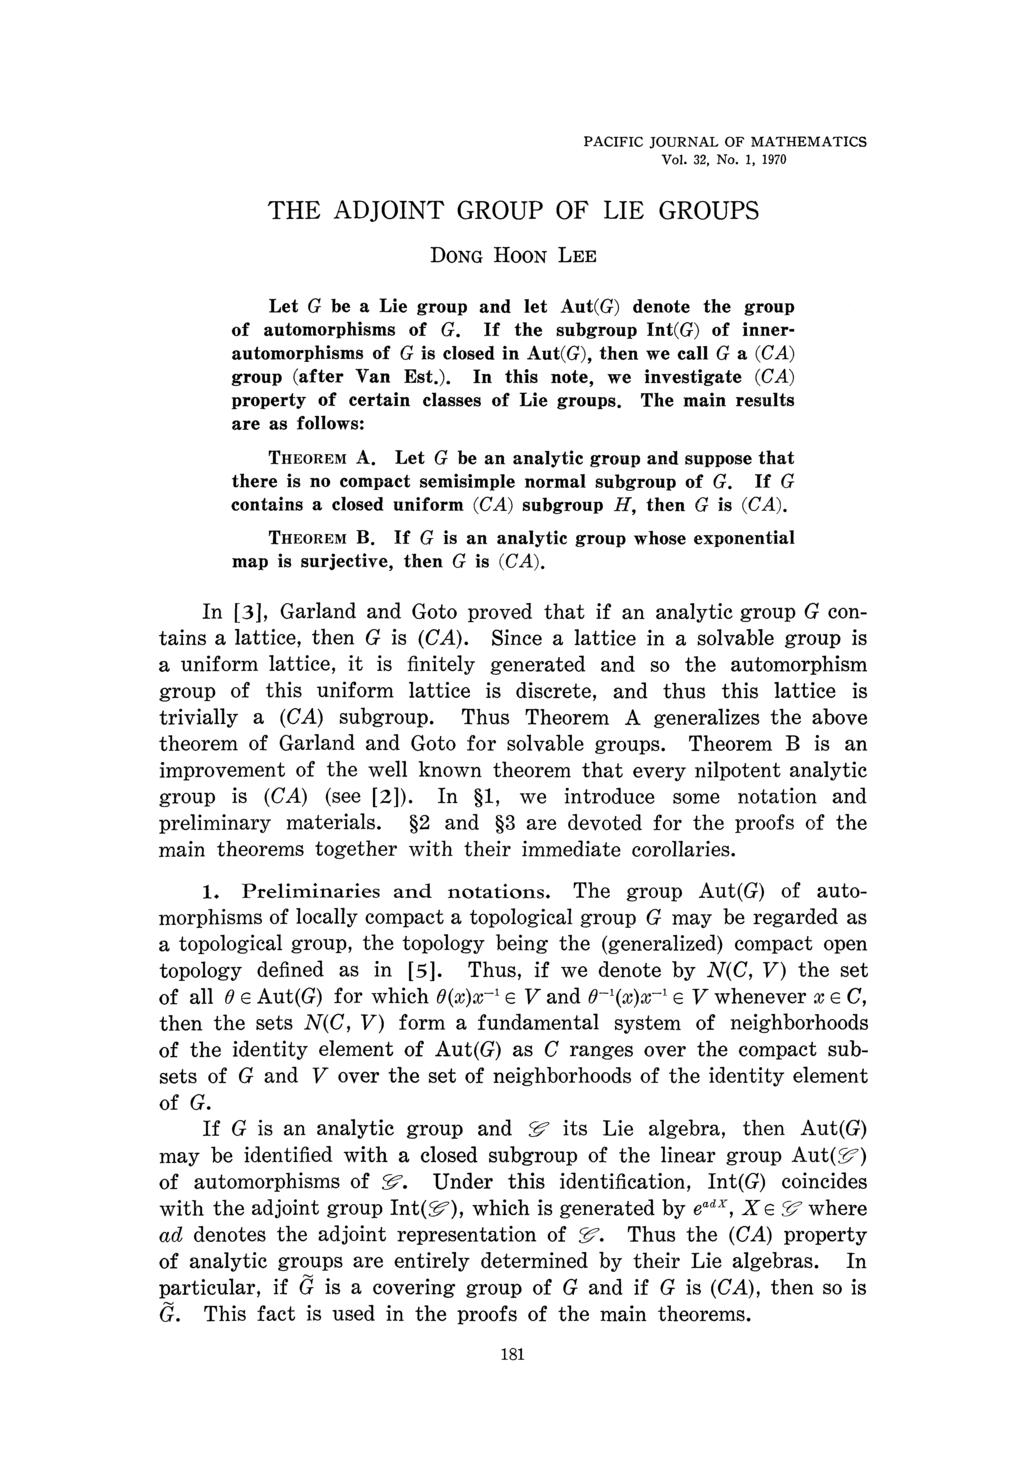 PACIFIC JOURNAL OF MATHEMATICS Vol. 32, No. 1, 1970 THE ADJOINT GROUP OF LIE GROUPS DONG HOON LEE Let G be a Lie group and let Aut(G) denote the group of automorphisms of G.